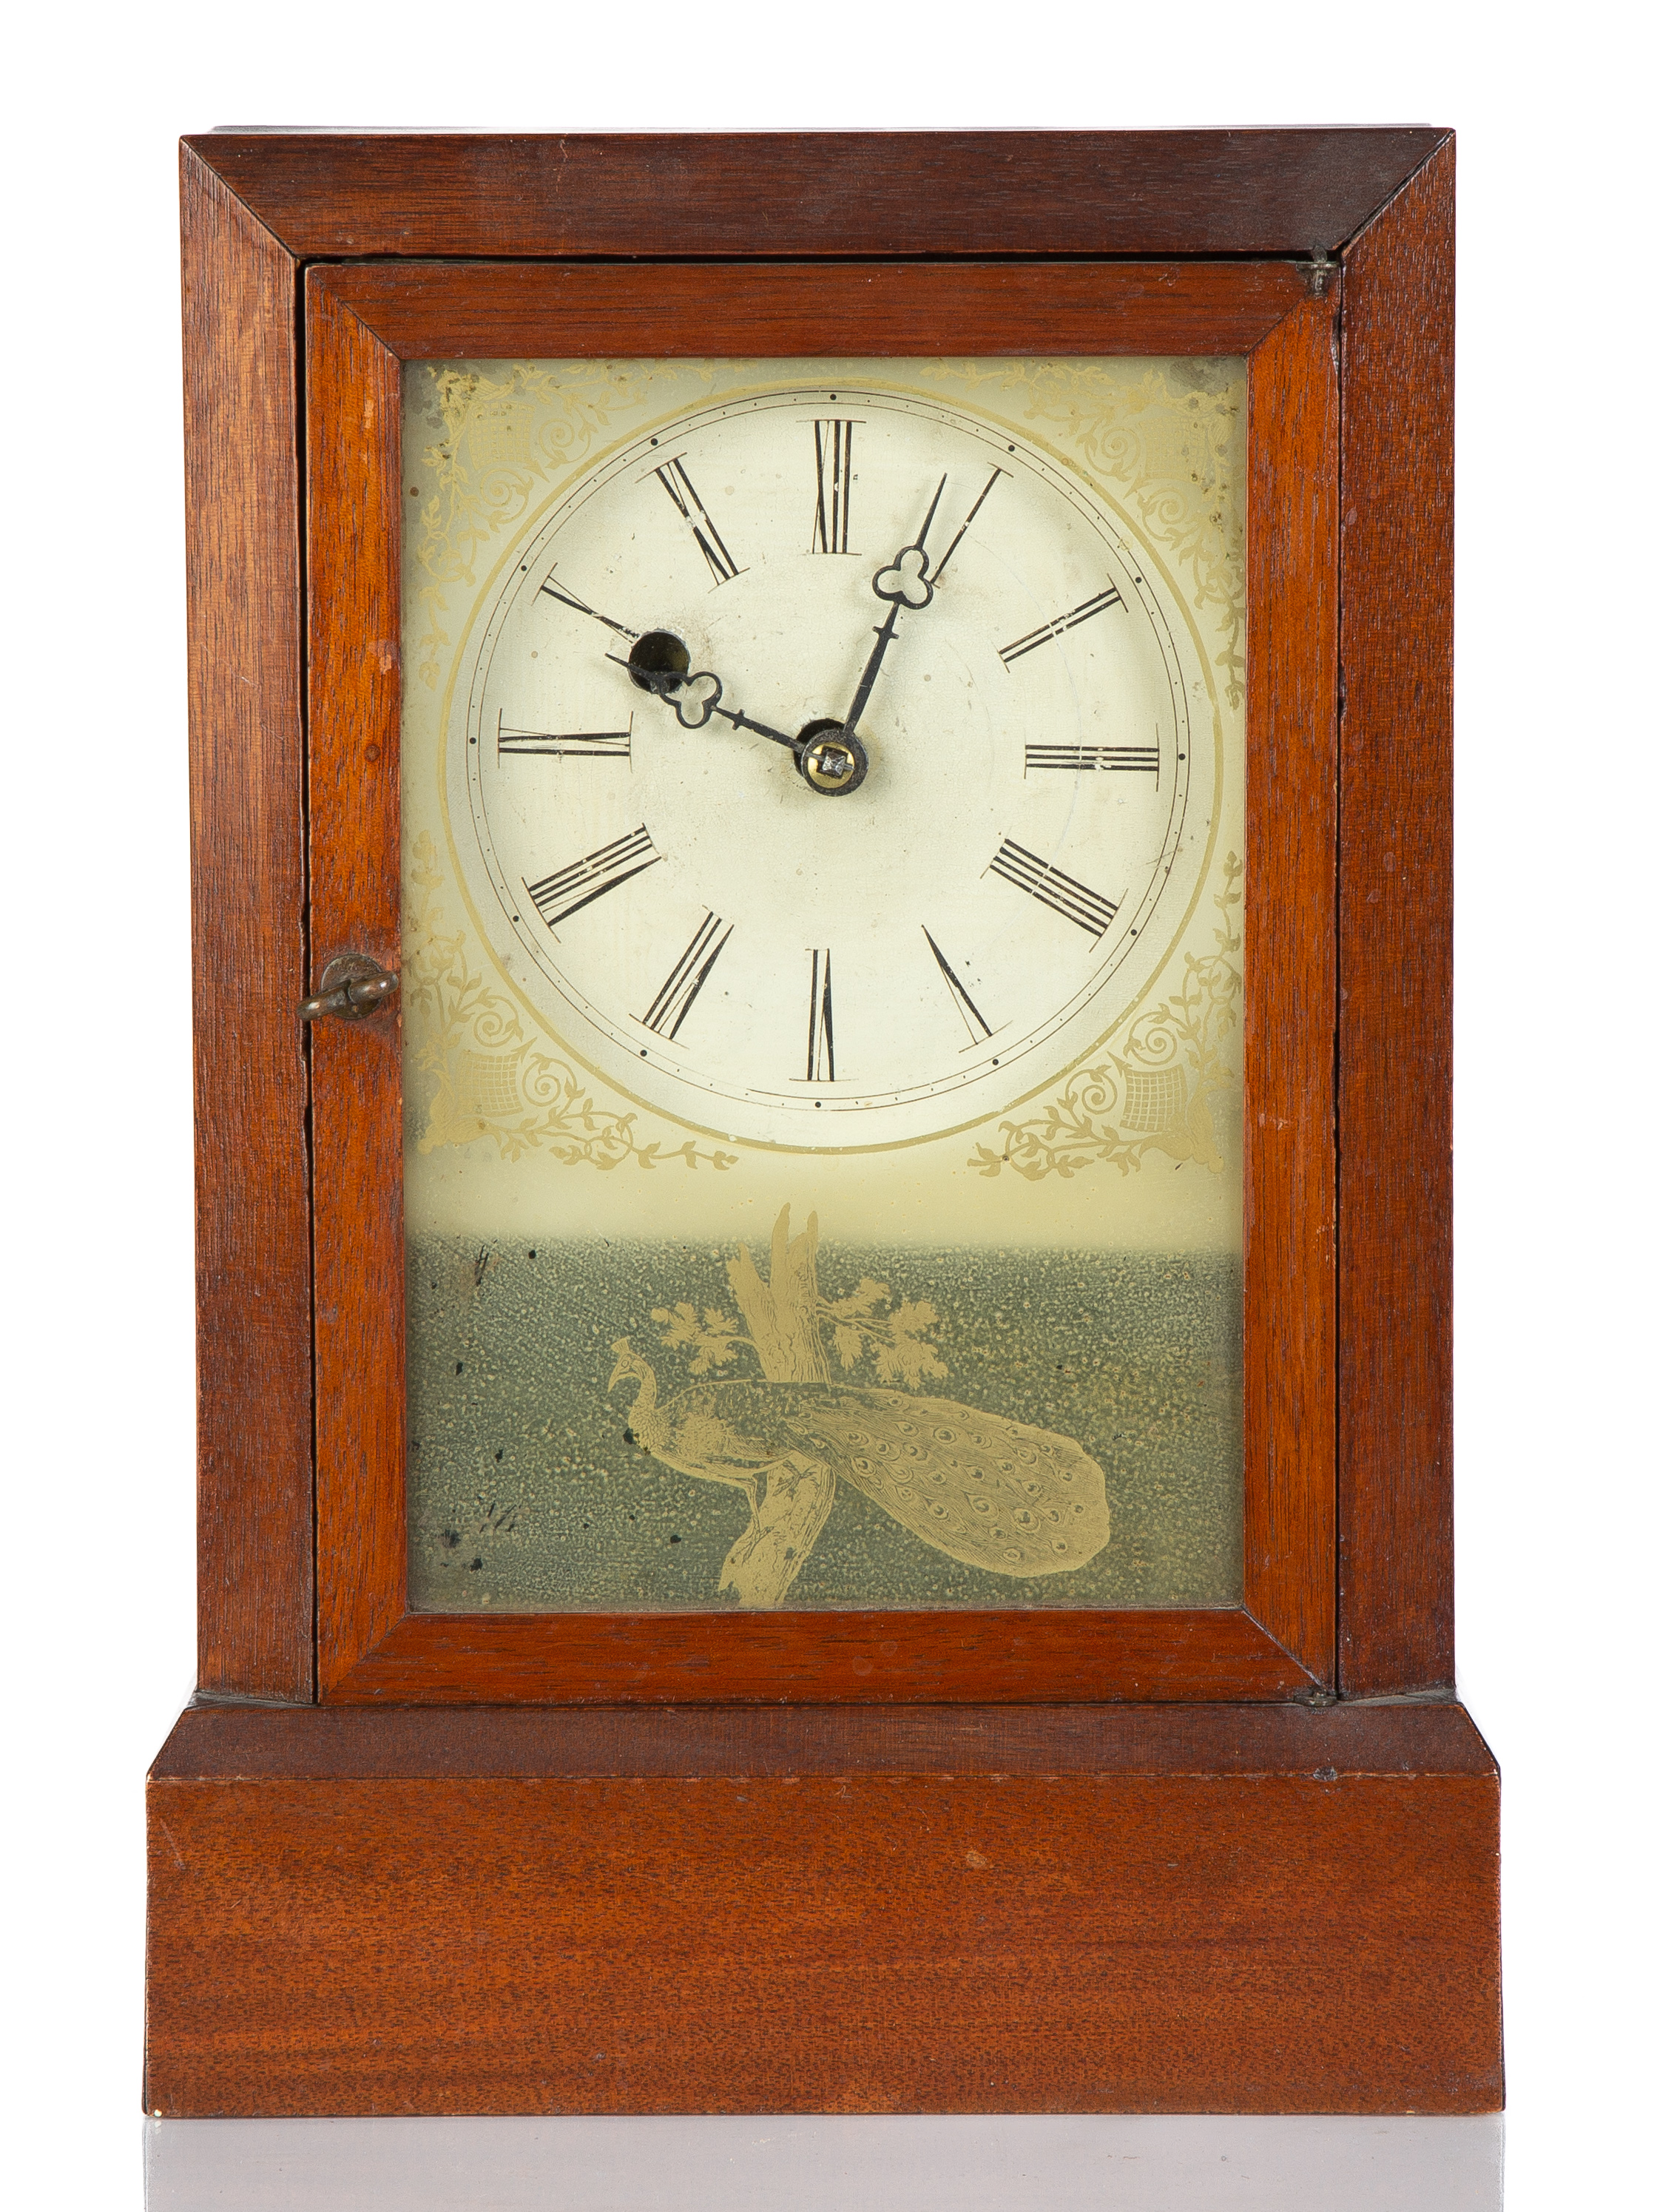 ATKINS WHITING CO COTTAGE CLOCK 2f376d